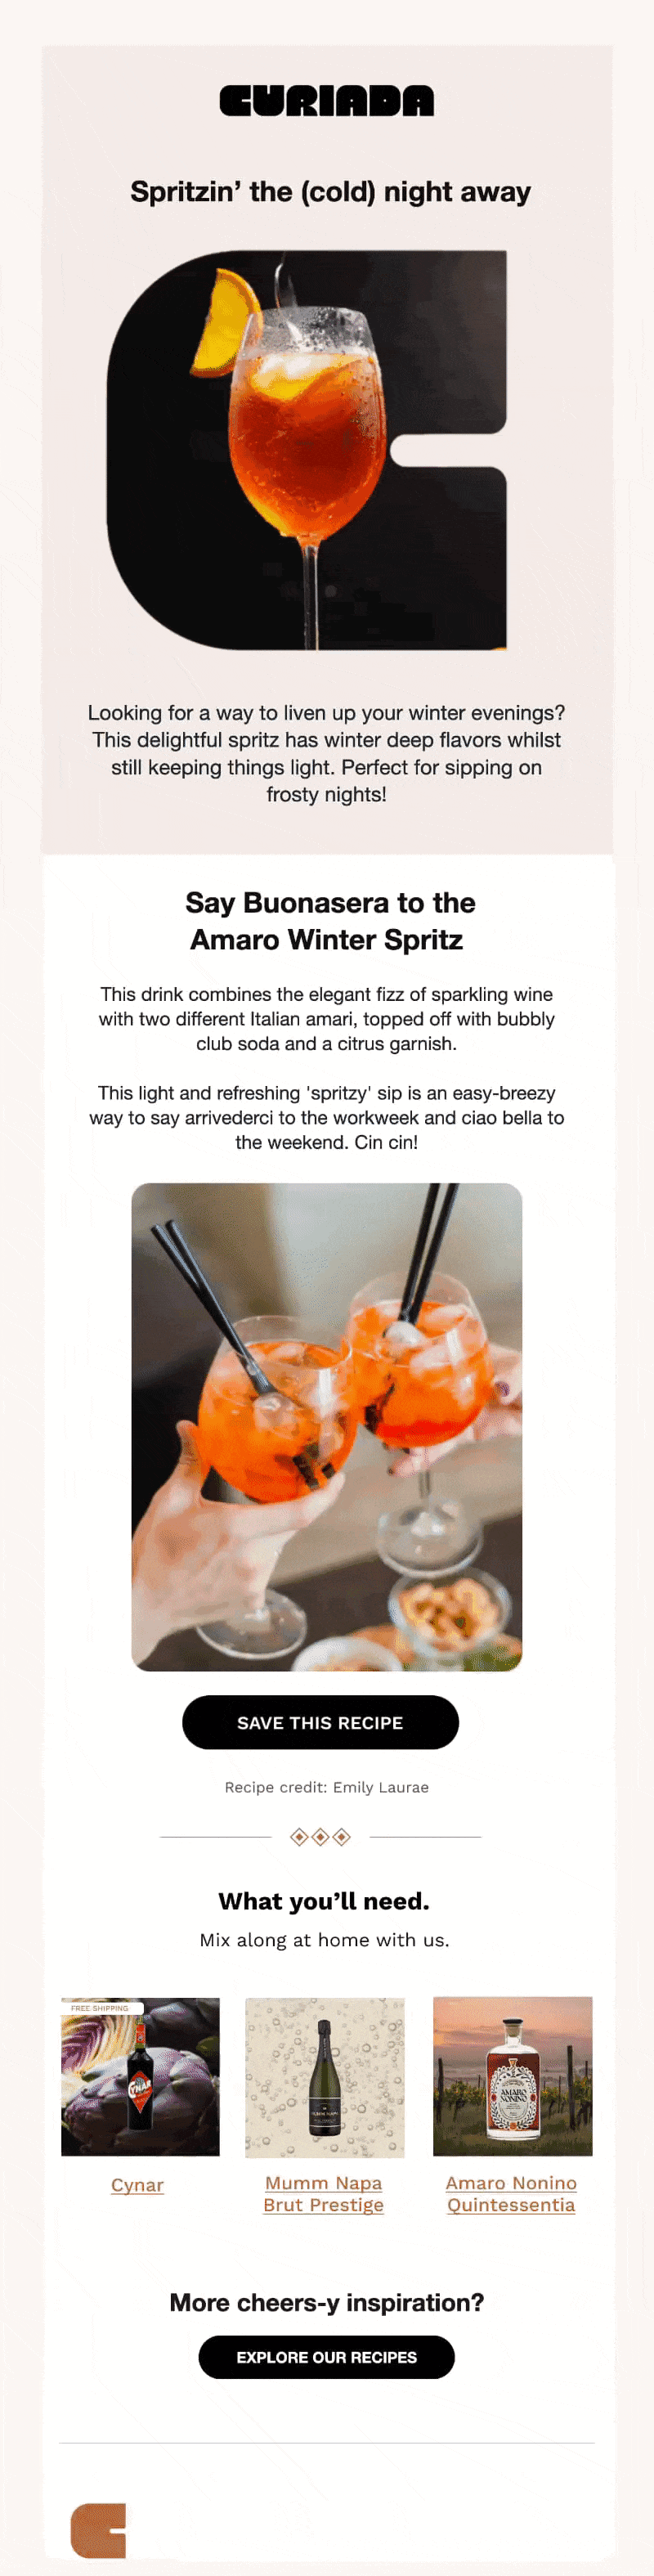 Curiada winter recipe newsletter with a GIF of an spritz drink